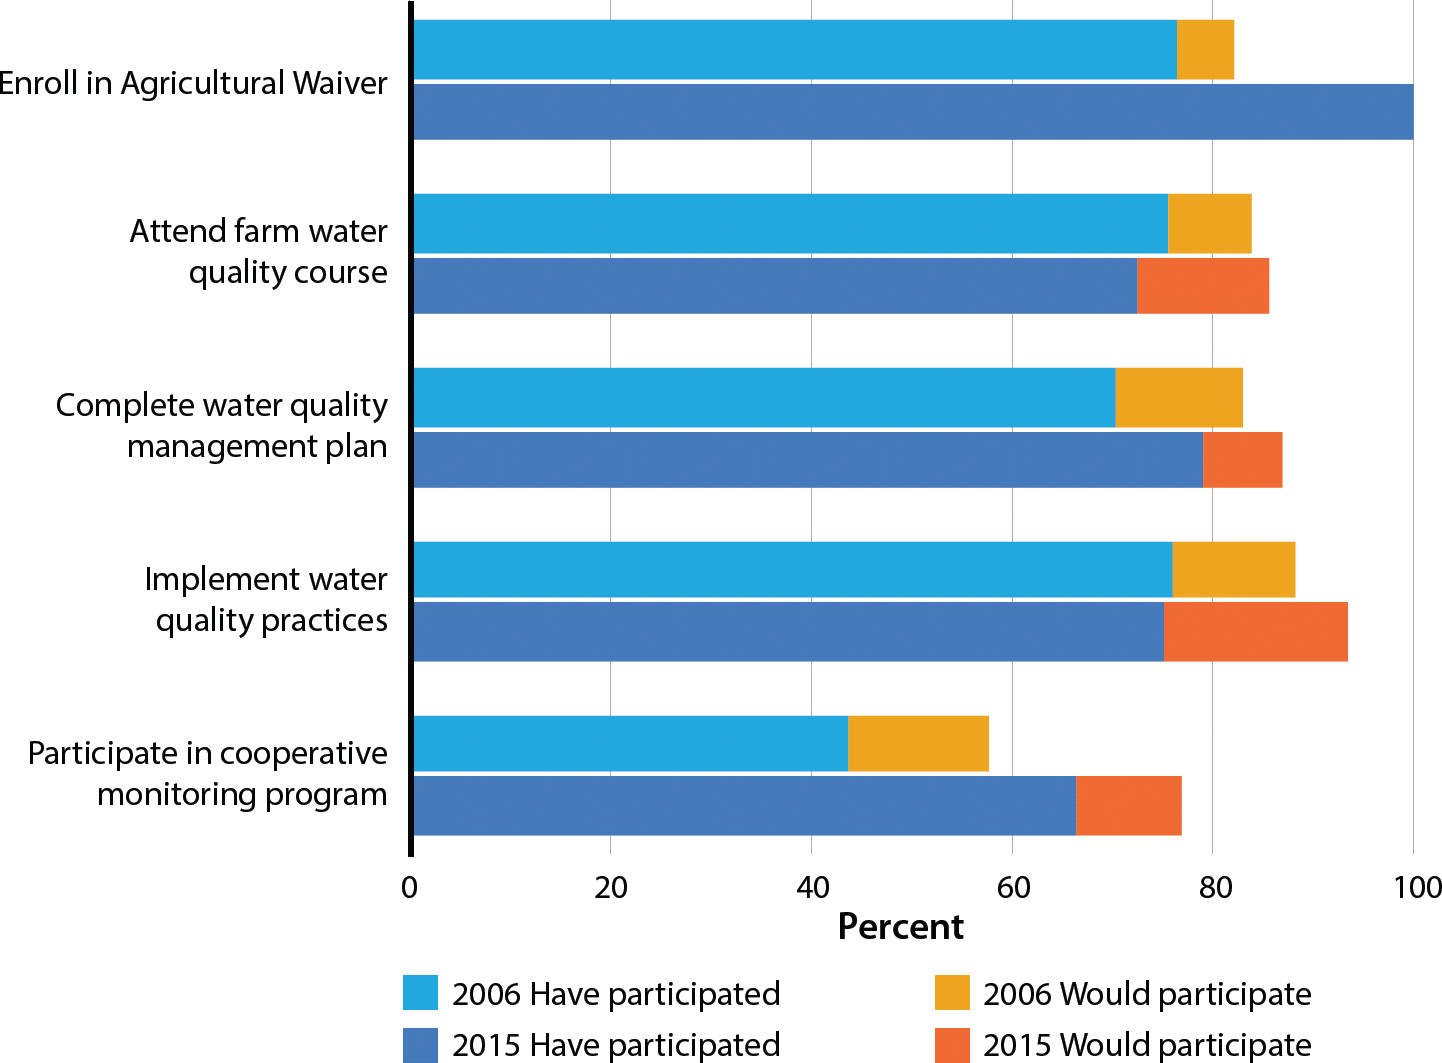 Types of water quality management activities growers in the Central Coast had already adopted or would be interested in adopting, as self-reported in 2006 and 2015 surveys.